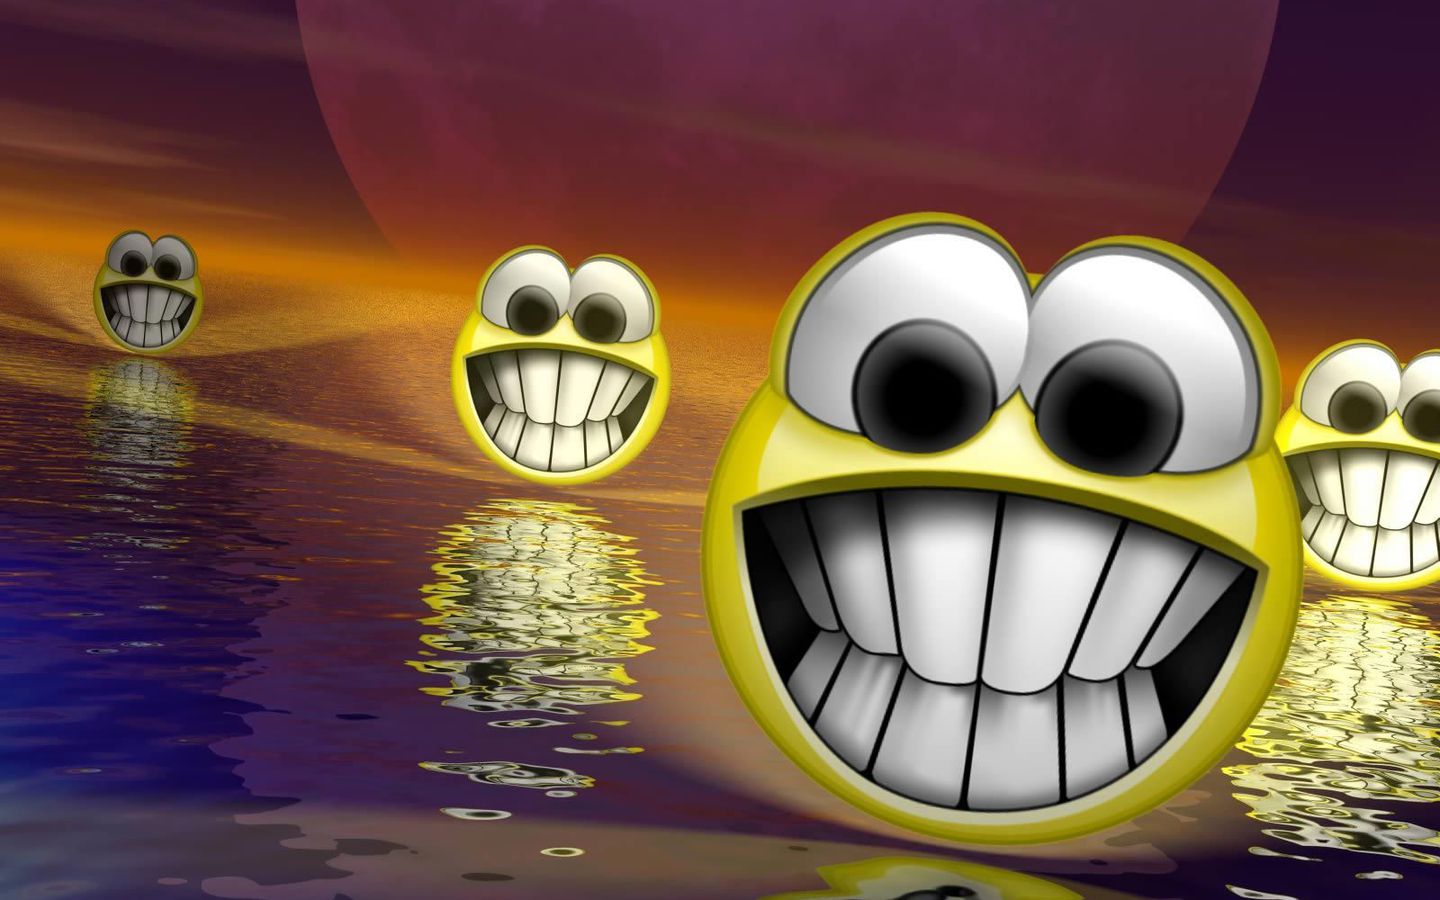 smiley face background hd wallpaper for mobile